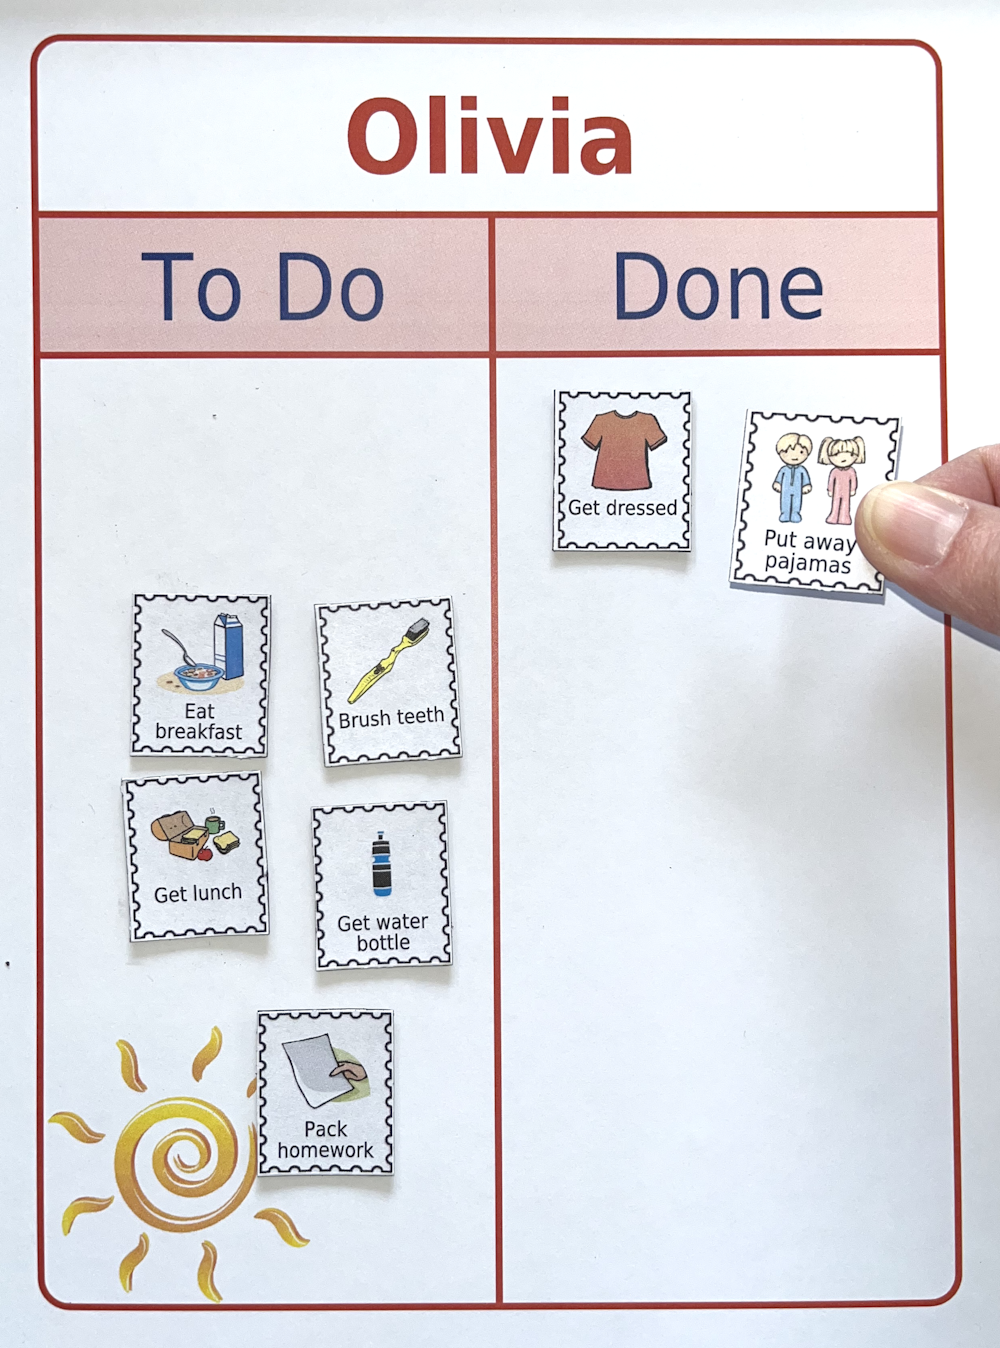 Make a personalized magnetic picture checklist for your kids. Print their name at the top, and choose the pictures and text for each magnet.